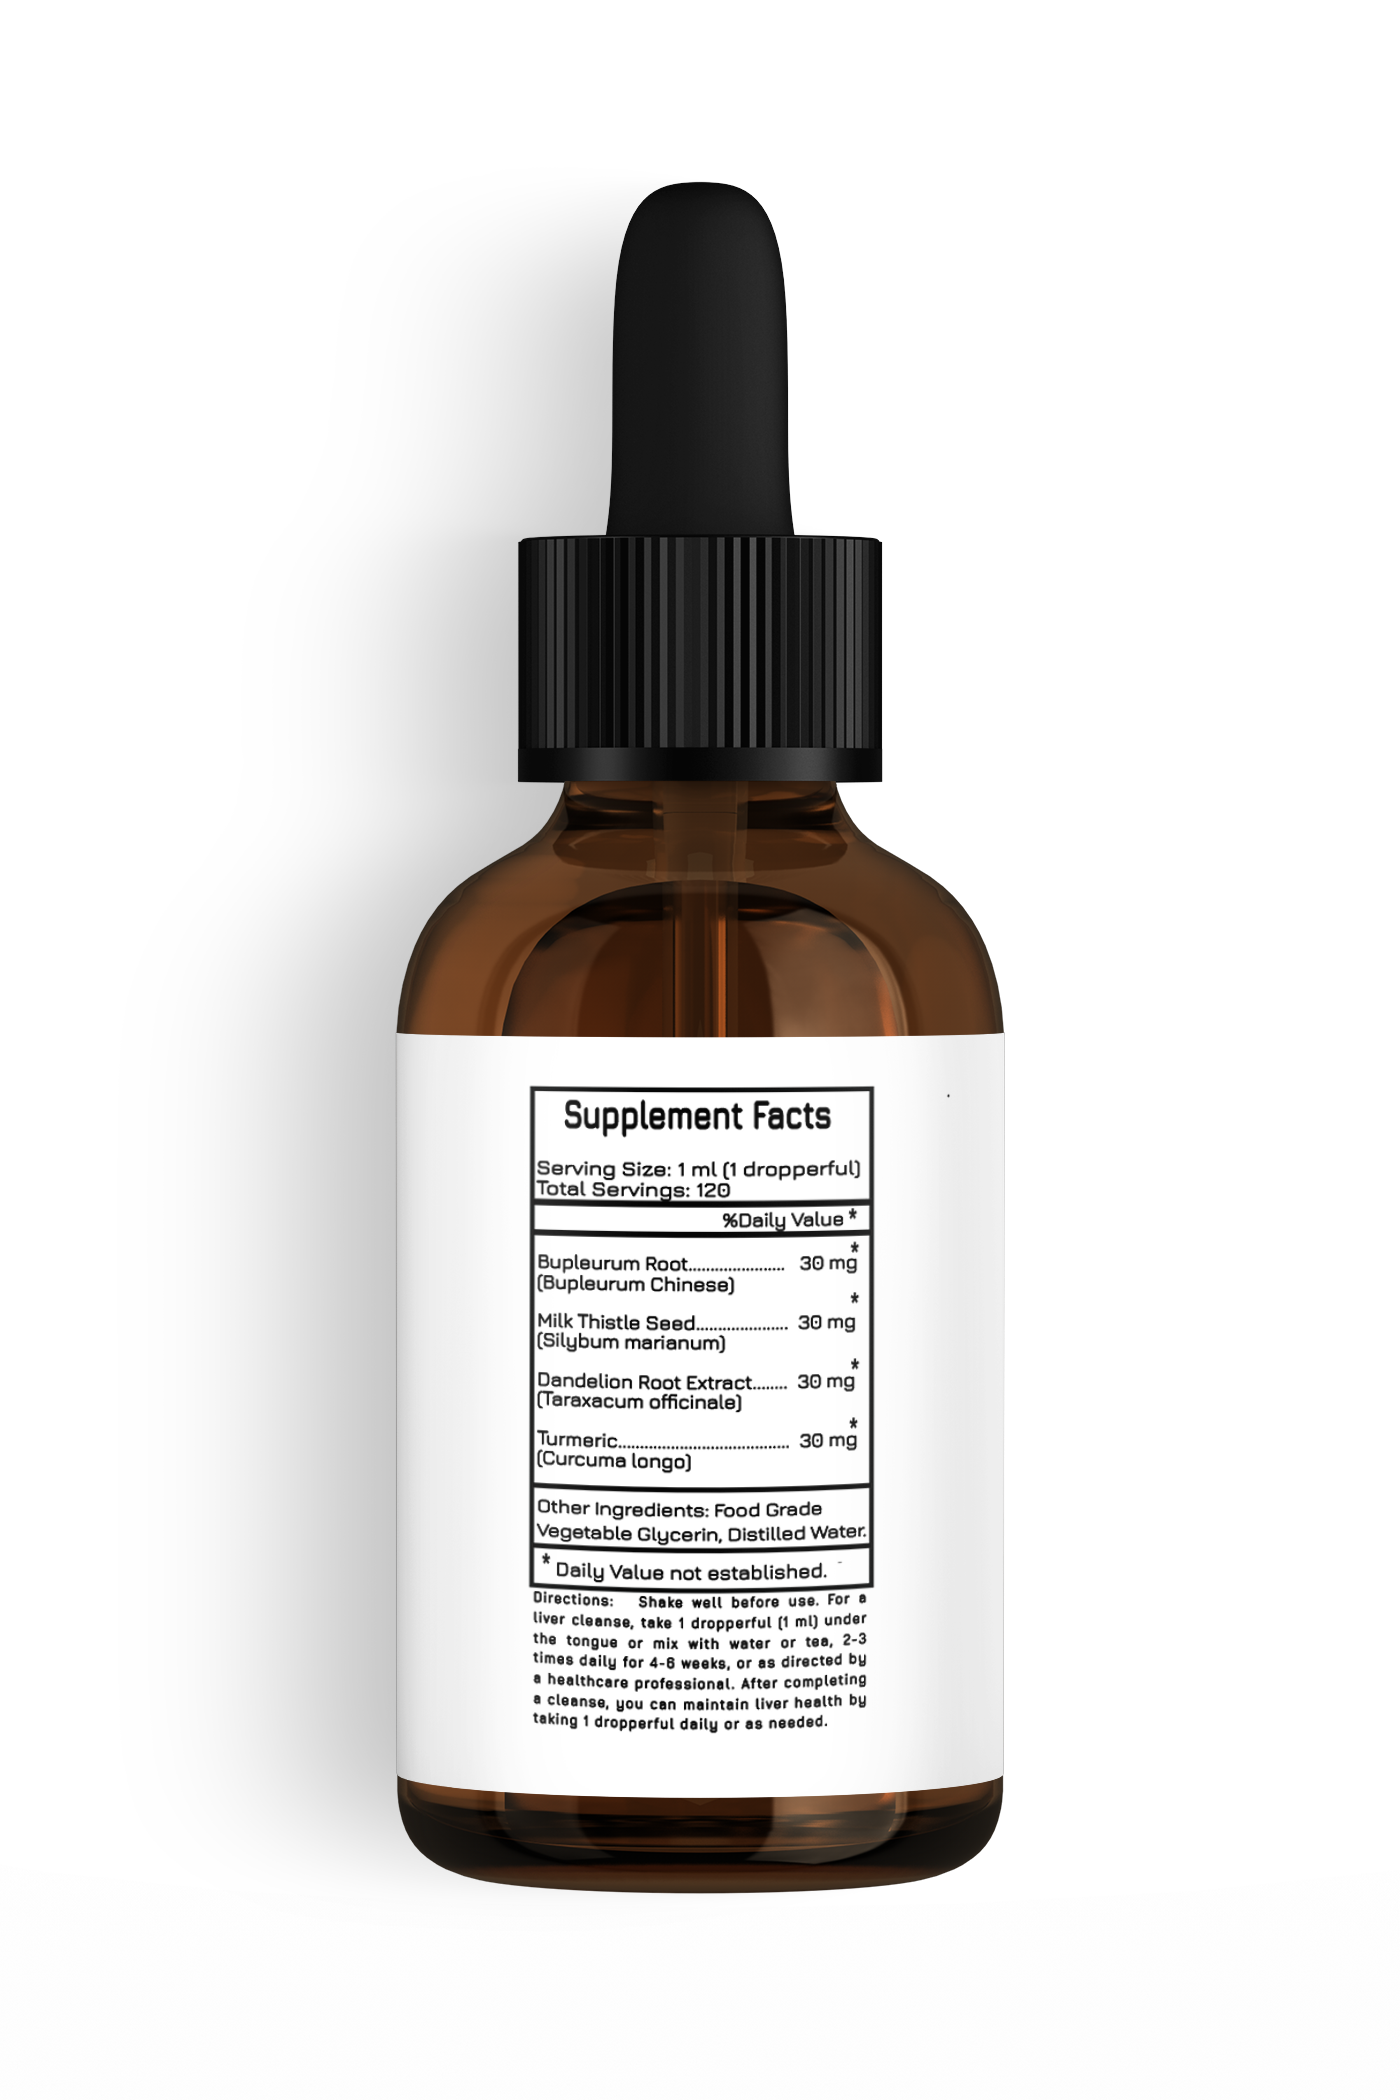 Liver Cleanse Pro™ Herbal Tincture for Natural Detoxification and Liver Support - Made with Milk Thistle, Dandelion Root, Turmeric, and Bupleurum Root Extracts